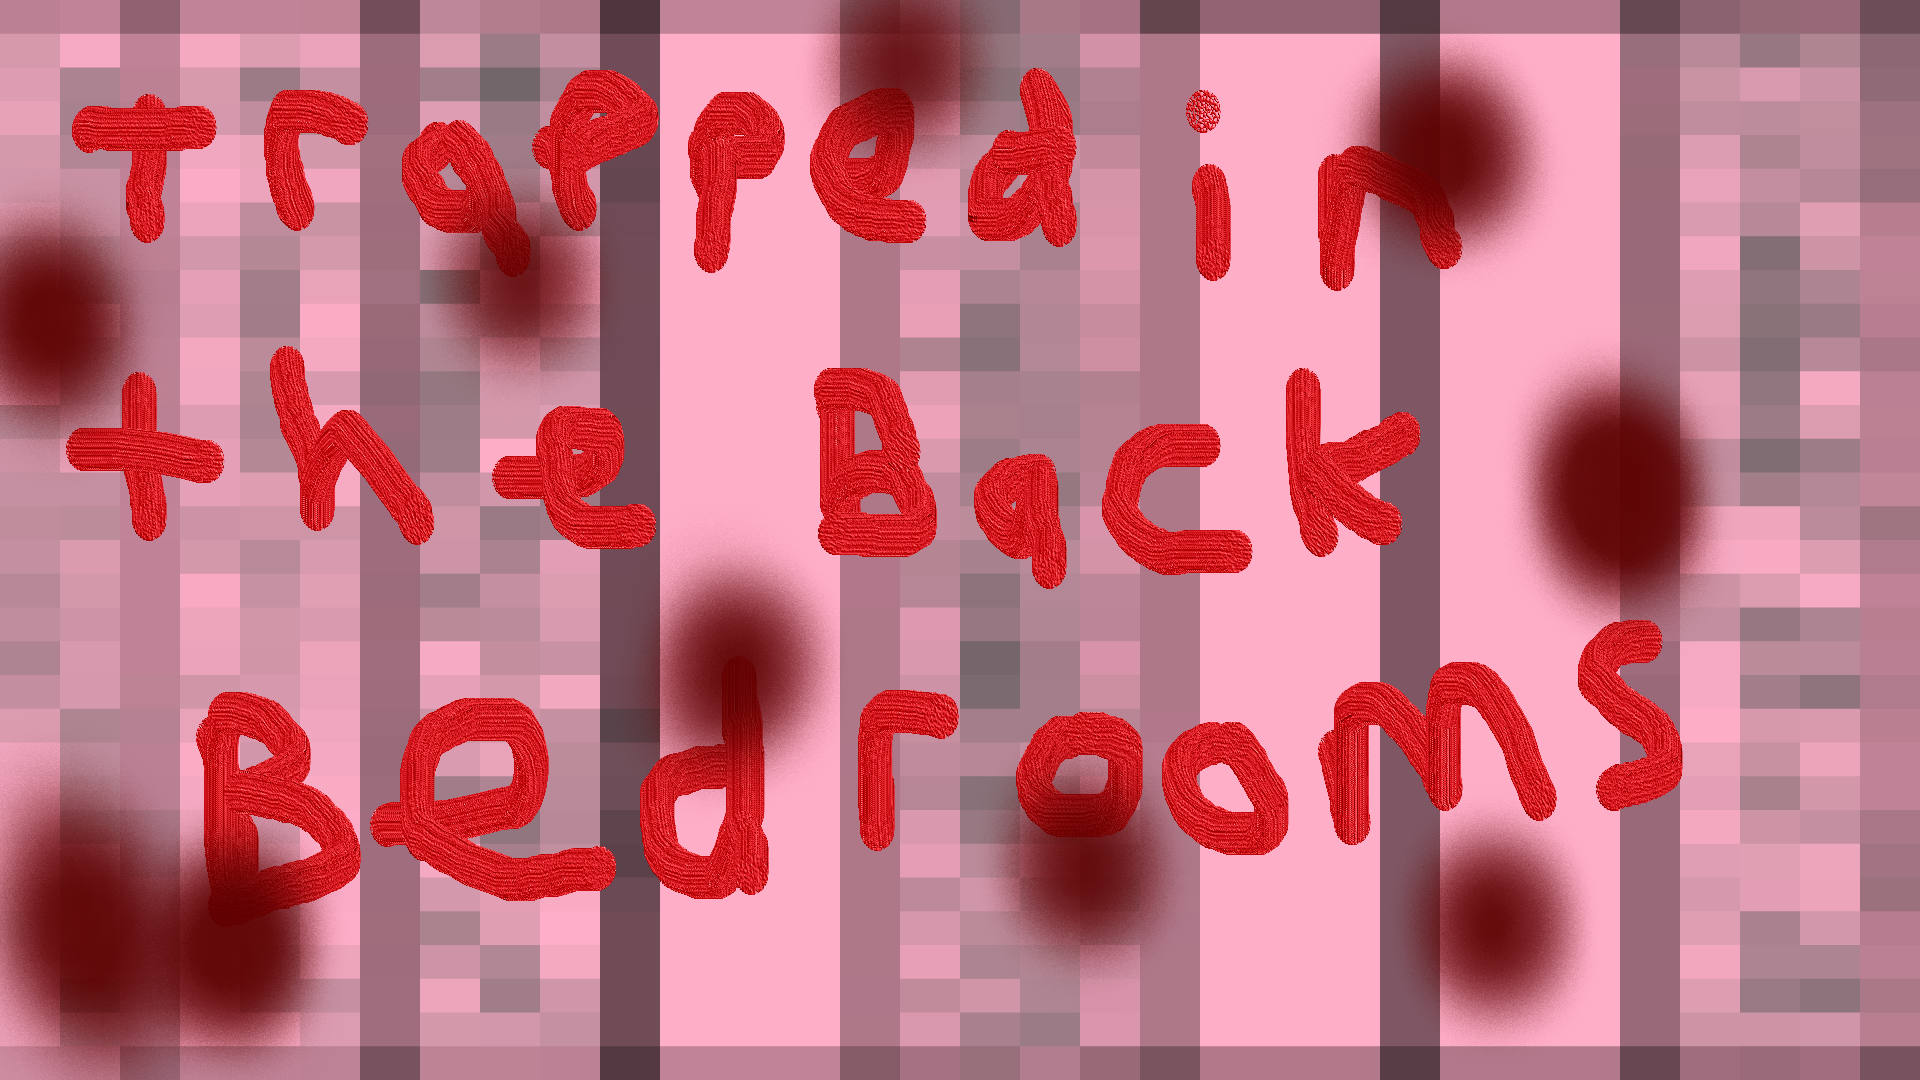 Trapped In the Back Bedrooms